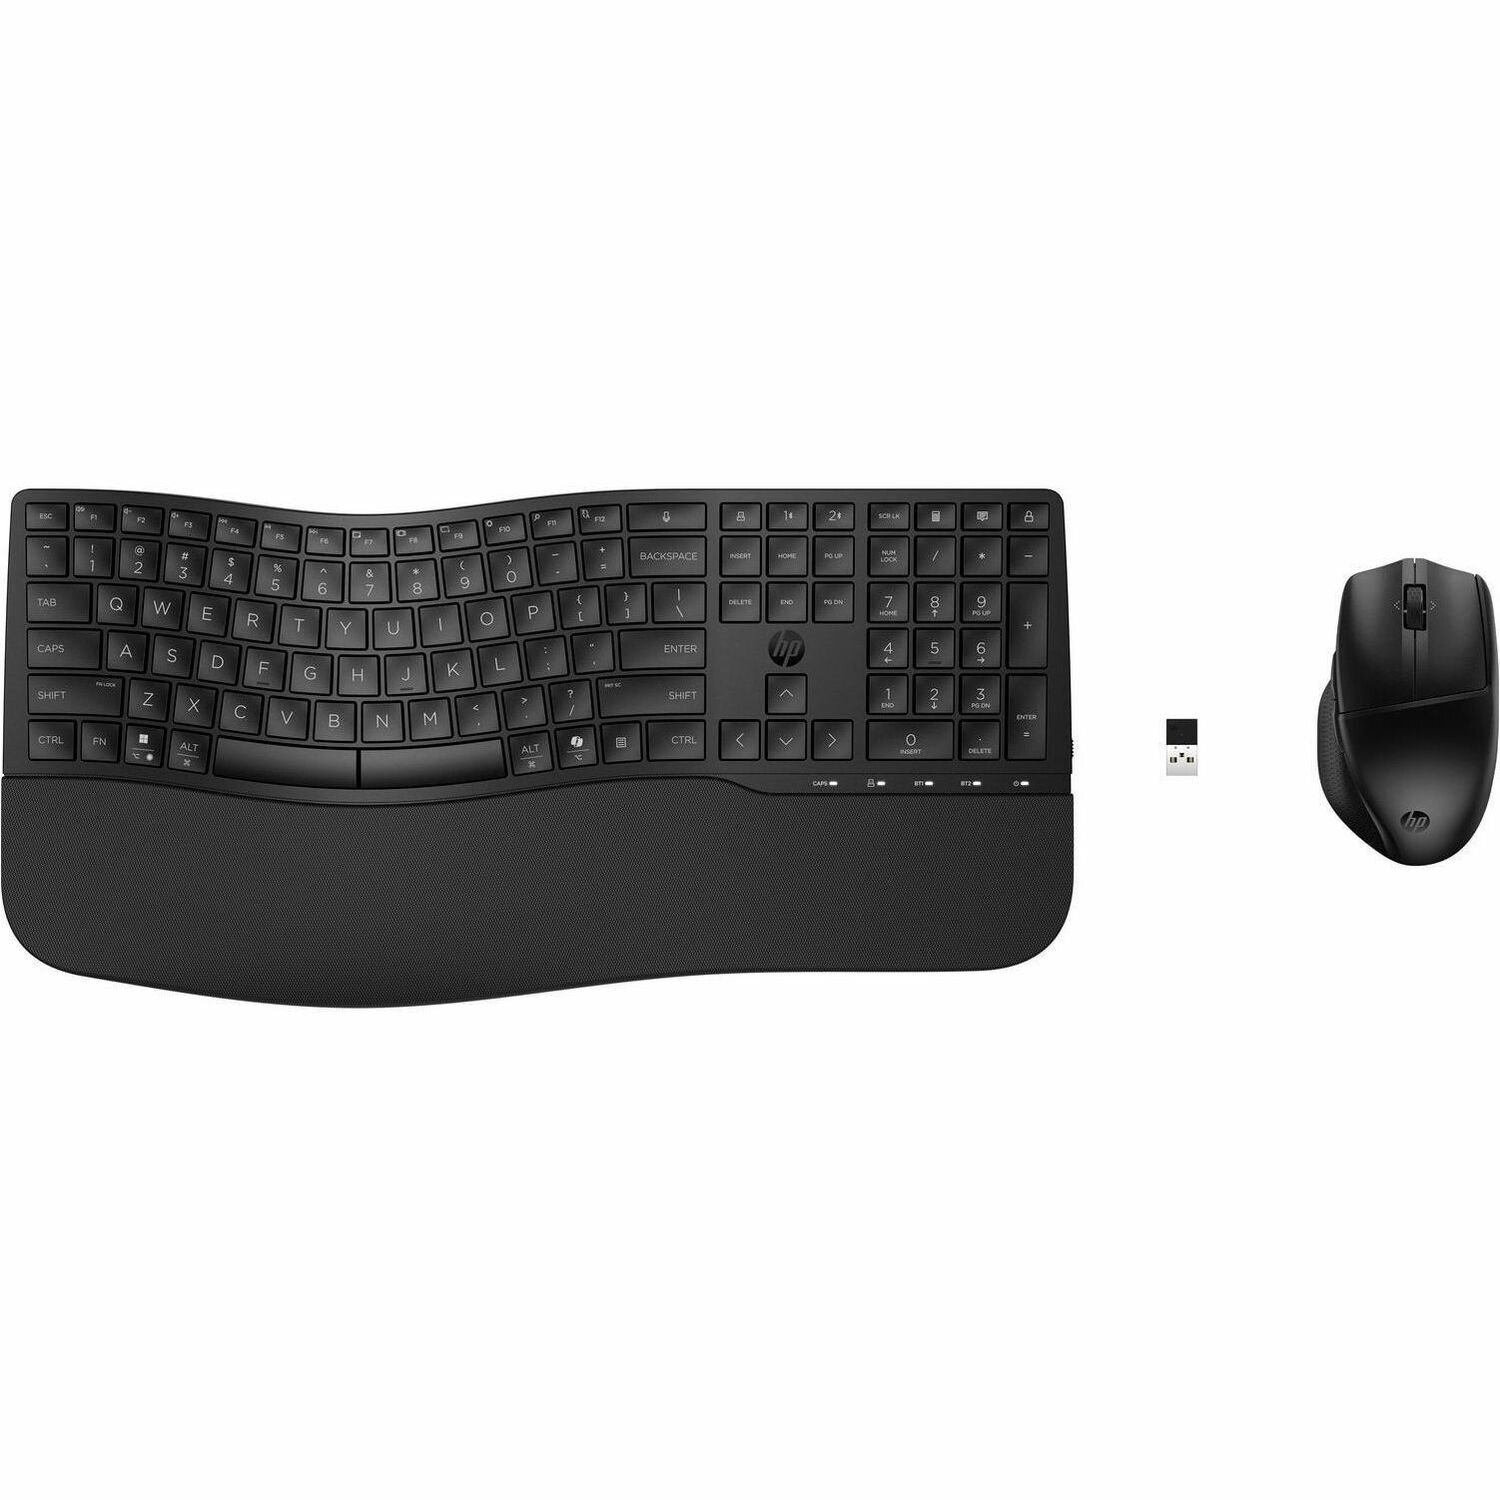 HP 685 Keyboard & Mouse